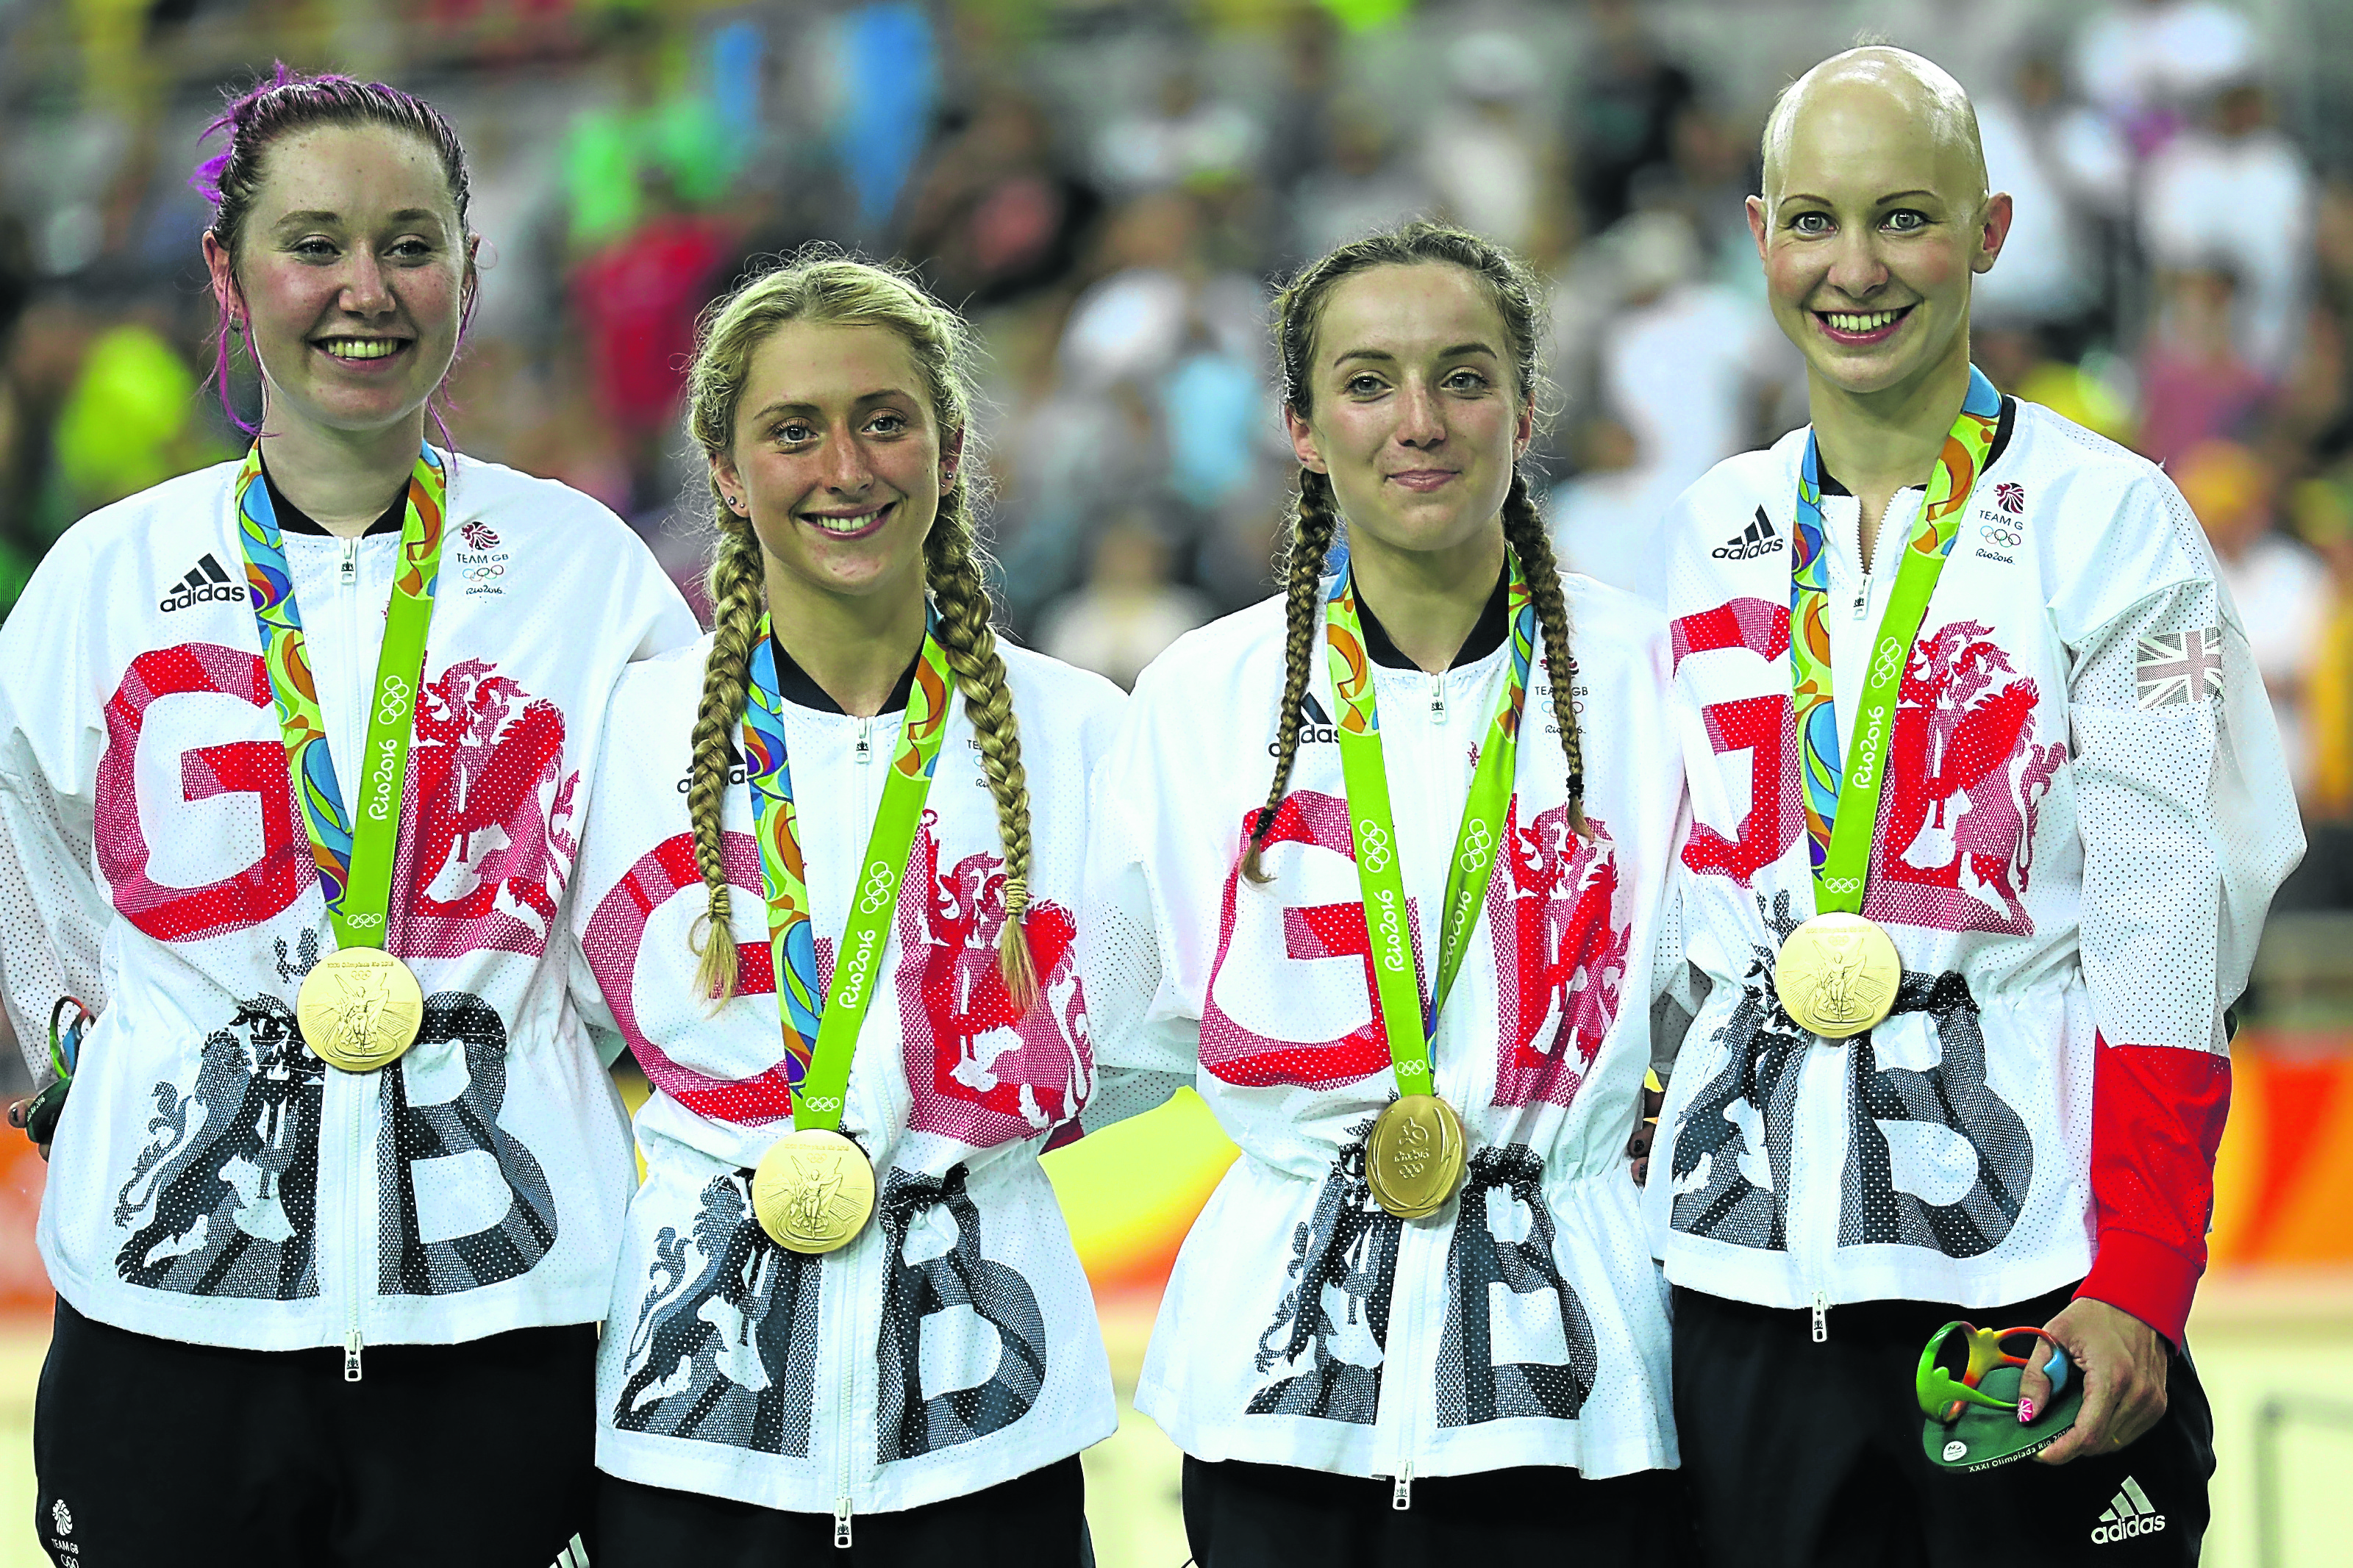 Gold medallists Laura Trott, Joanna Rowsell-Shand, Katie Archibald, Elinor Barker of Great Britain celebrate on the podium at the medal ceremony for the Women's Team Pursuit (Photo by Bryn Lennon/Getty Images)